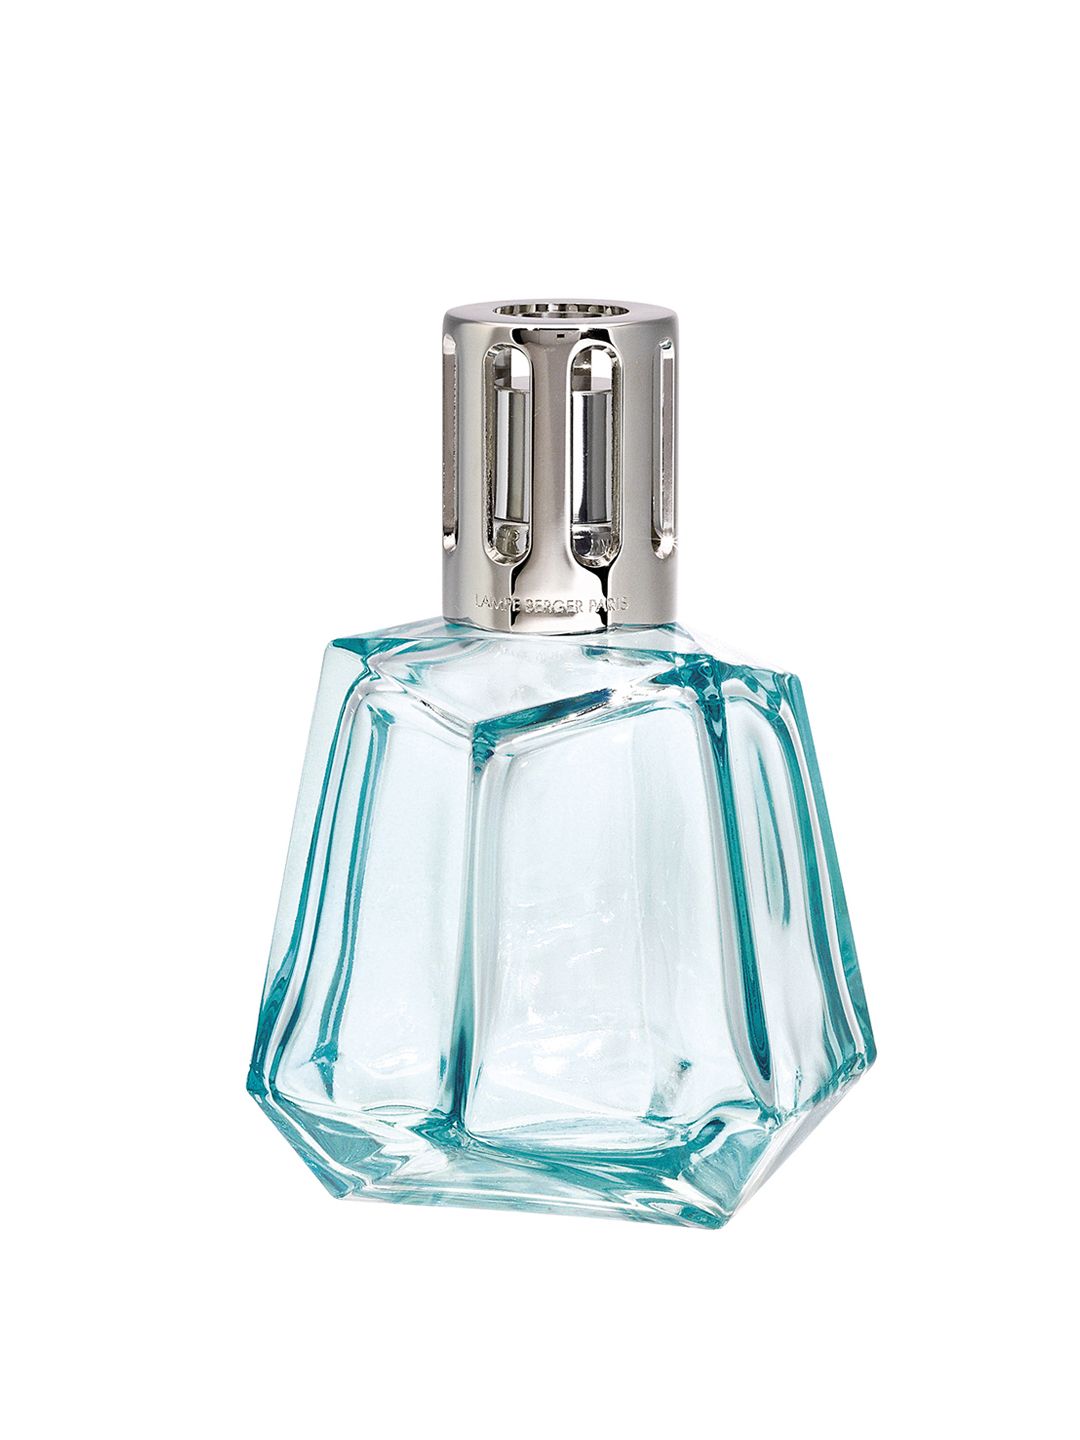 MAISON BERGER Blue & Silver-Toned Glass ORIGAMI BLEUE Aroma Oil Diffuser Price in India